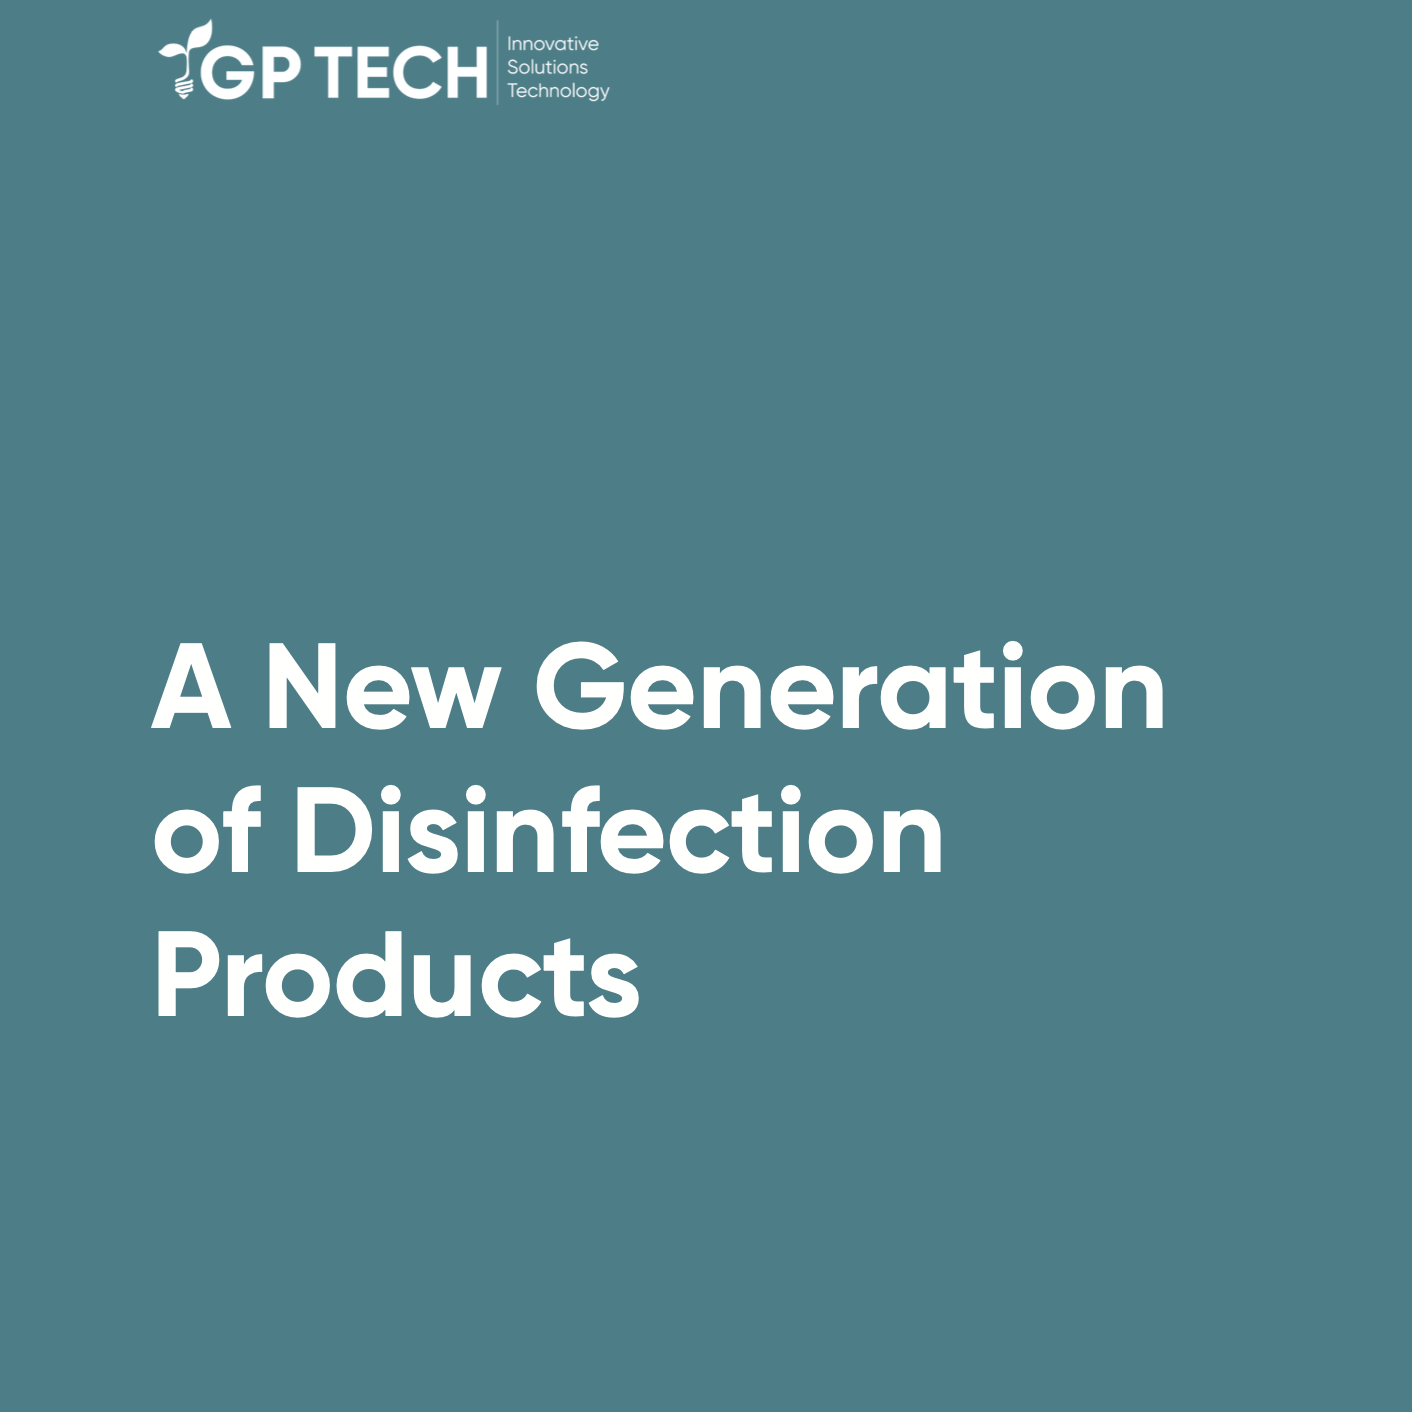 A new generation of disinfection products